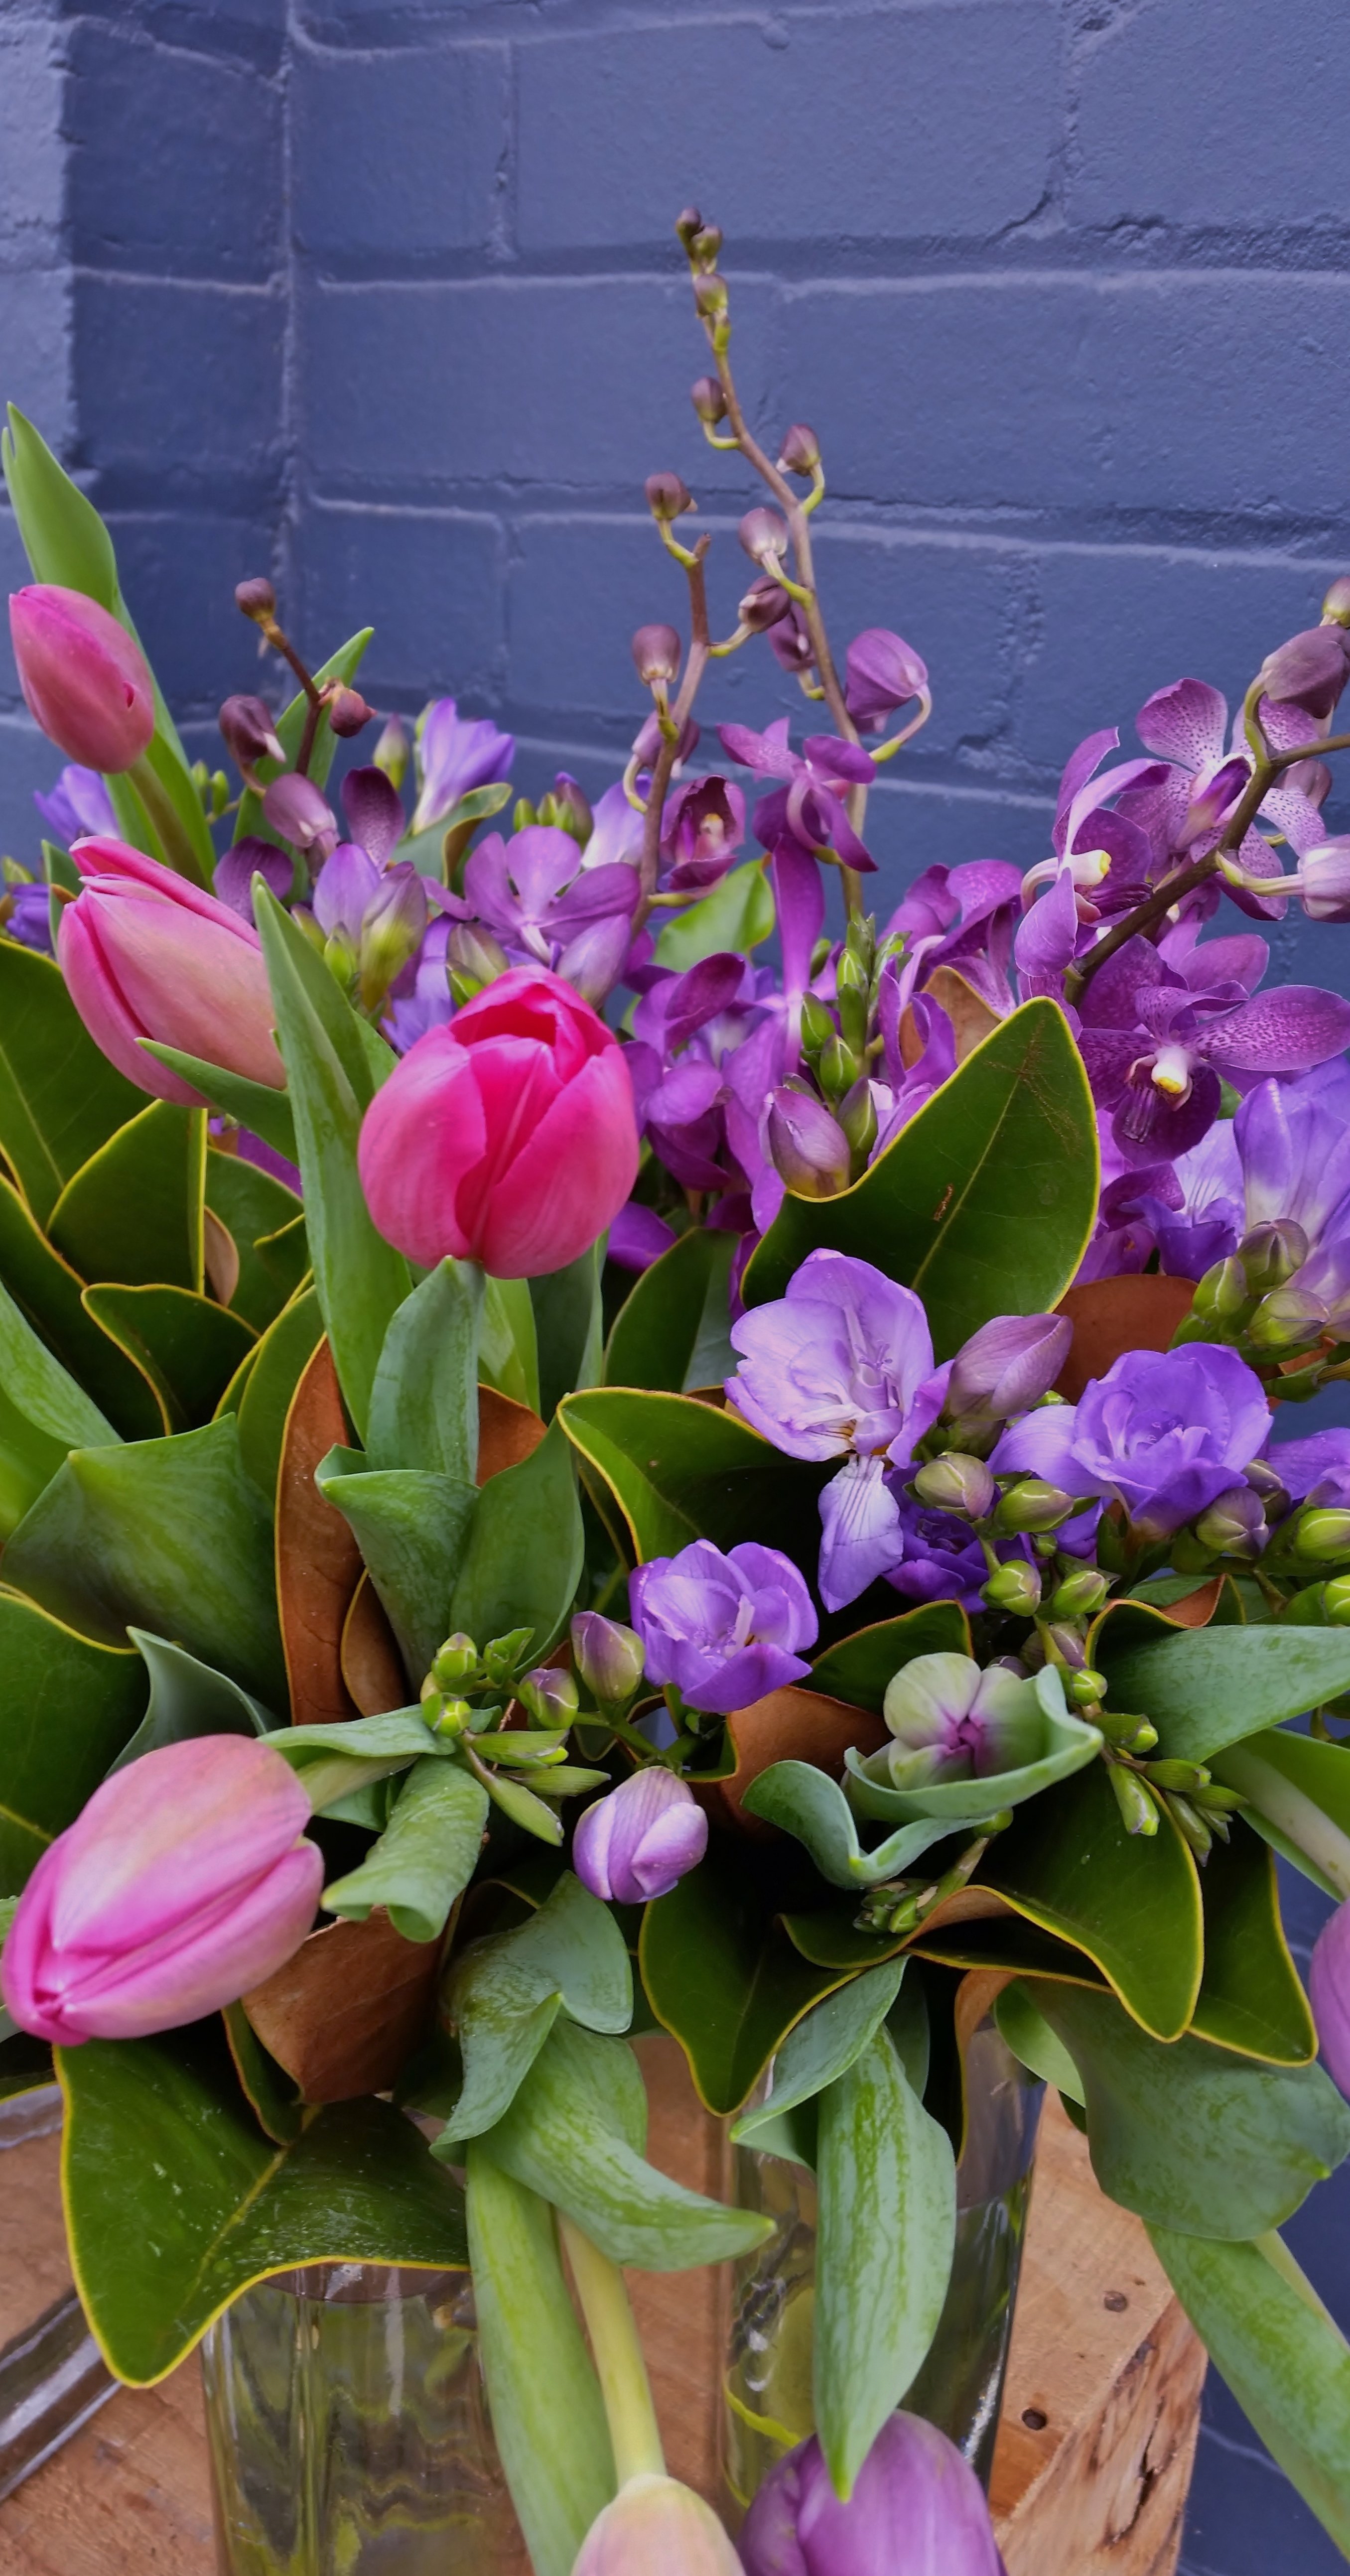 Subiaco Flowers - spring flowers now available for delivery in Subiaco, including to St John of God and King Edward Hospitals